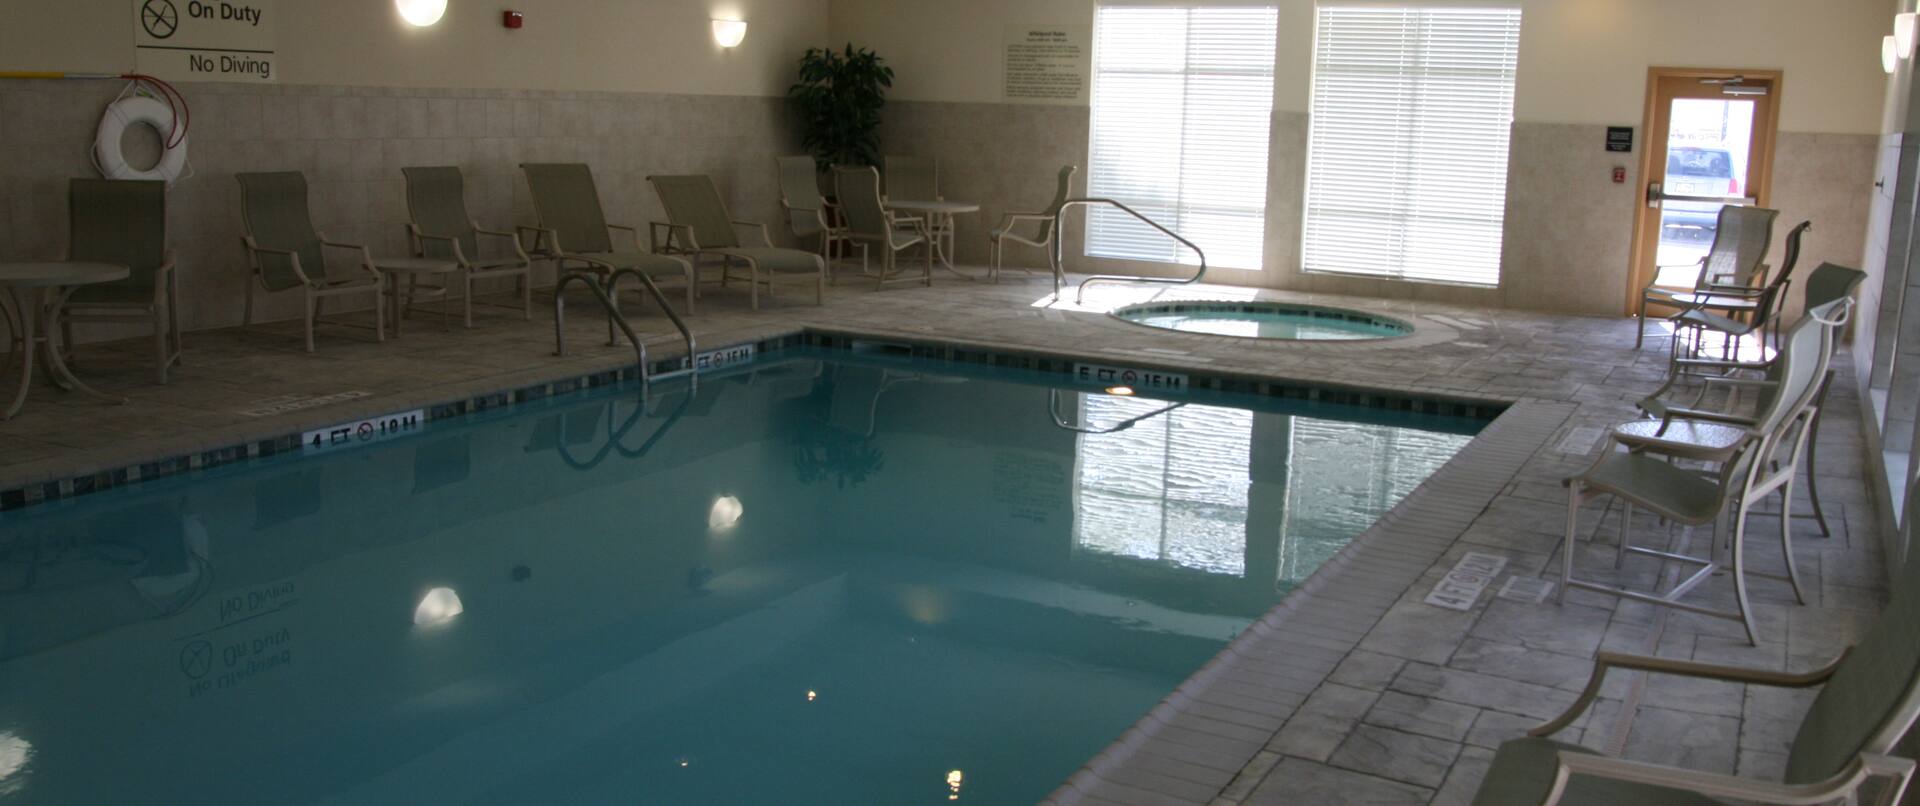 Longers, Tables, and Chairs by Indoor Pool Area With Window